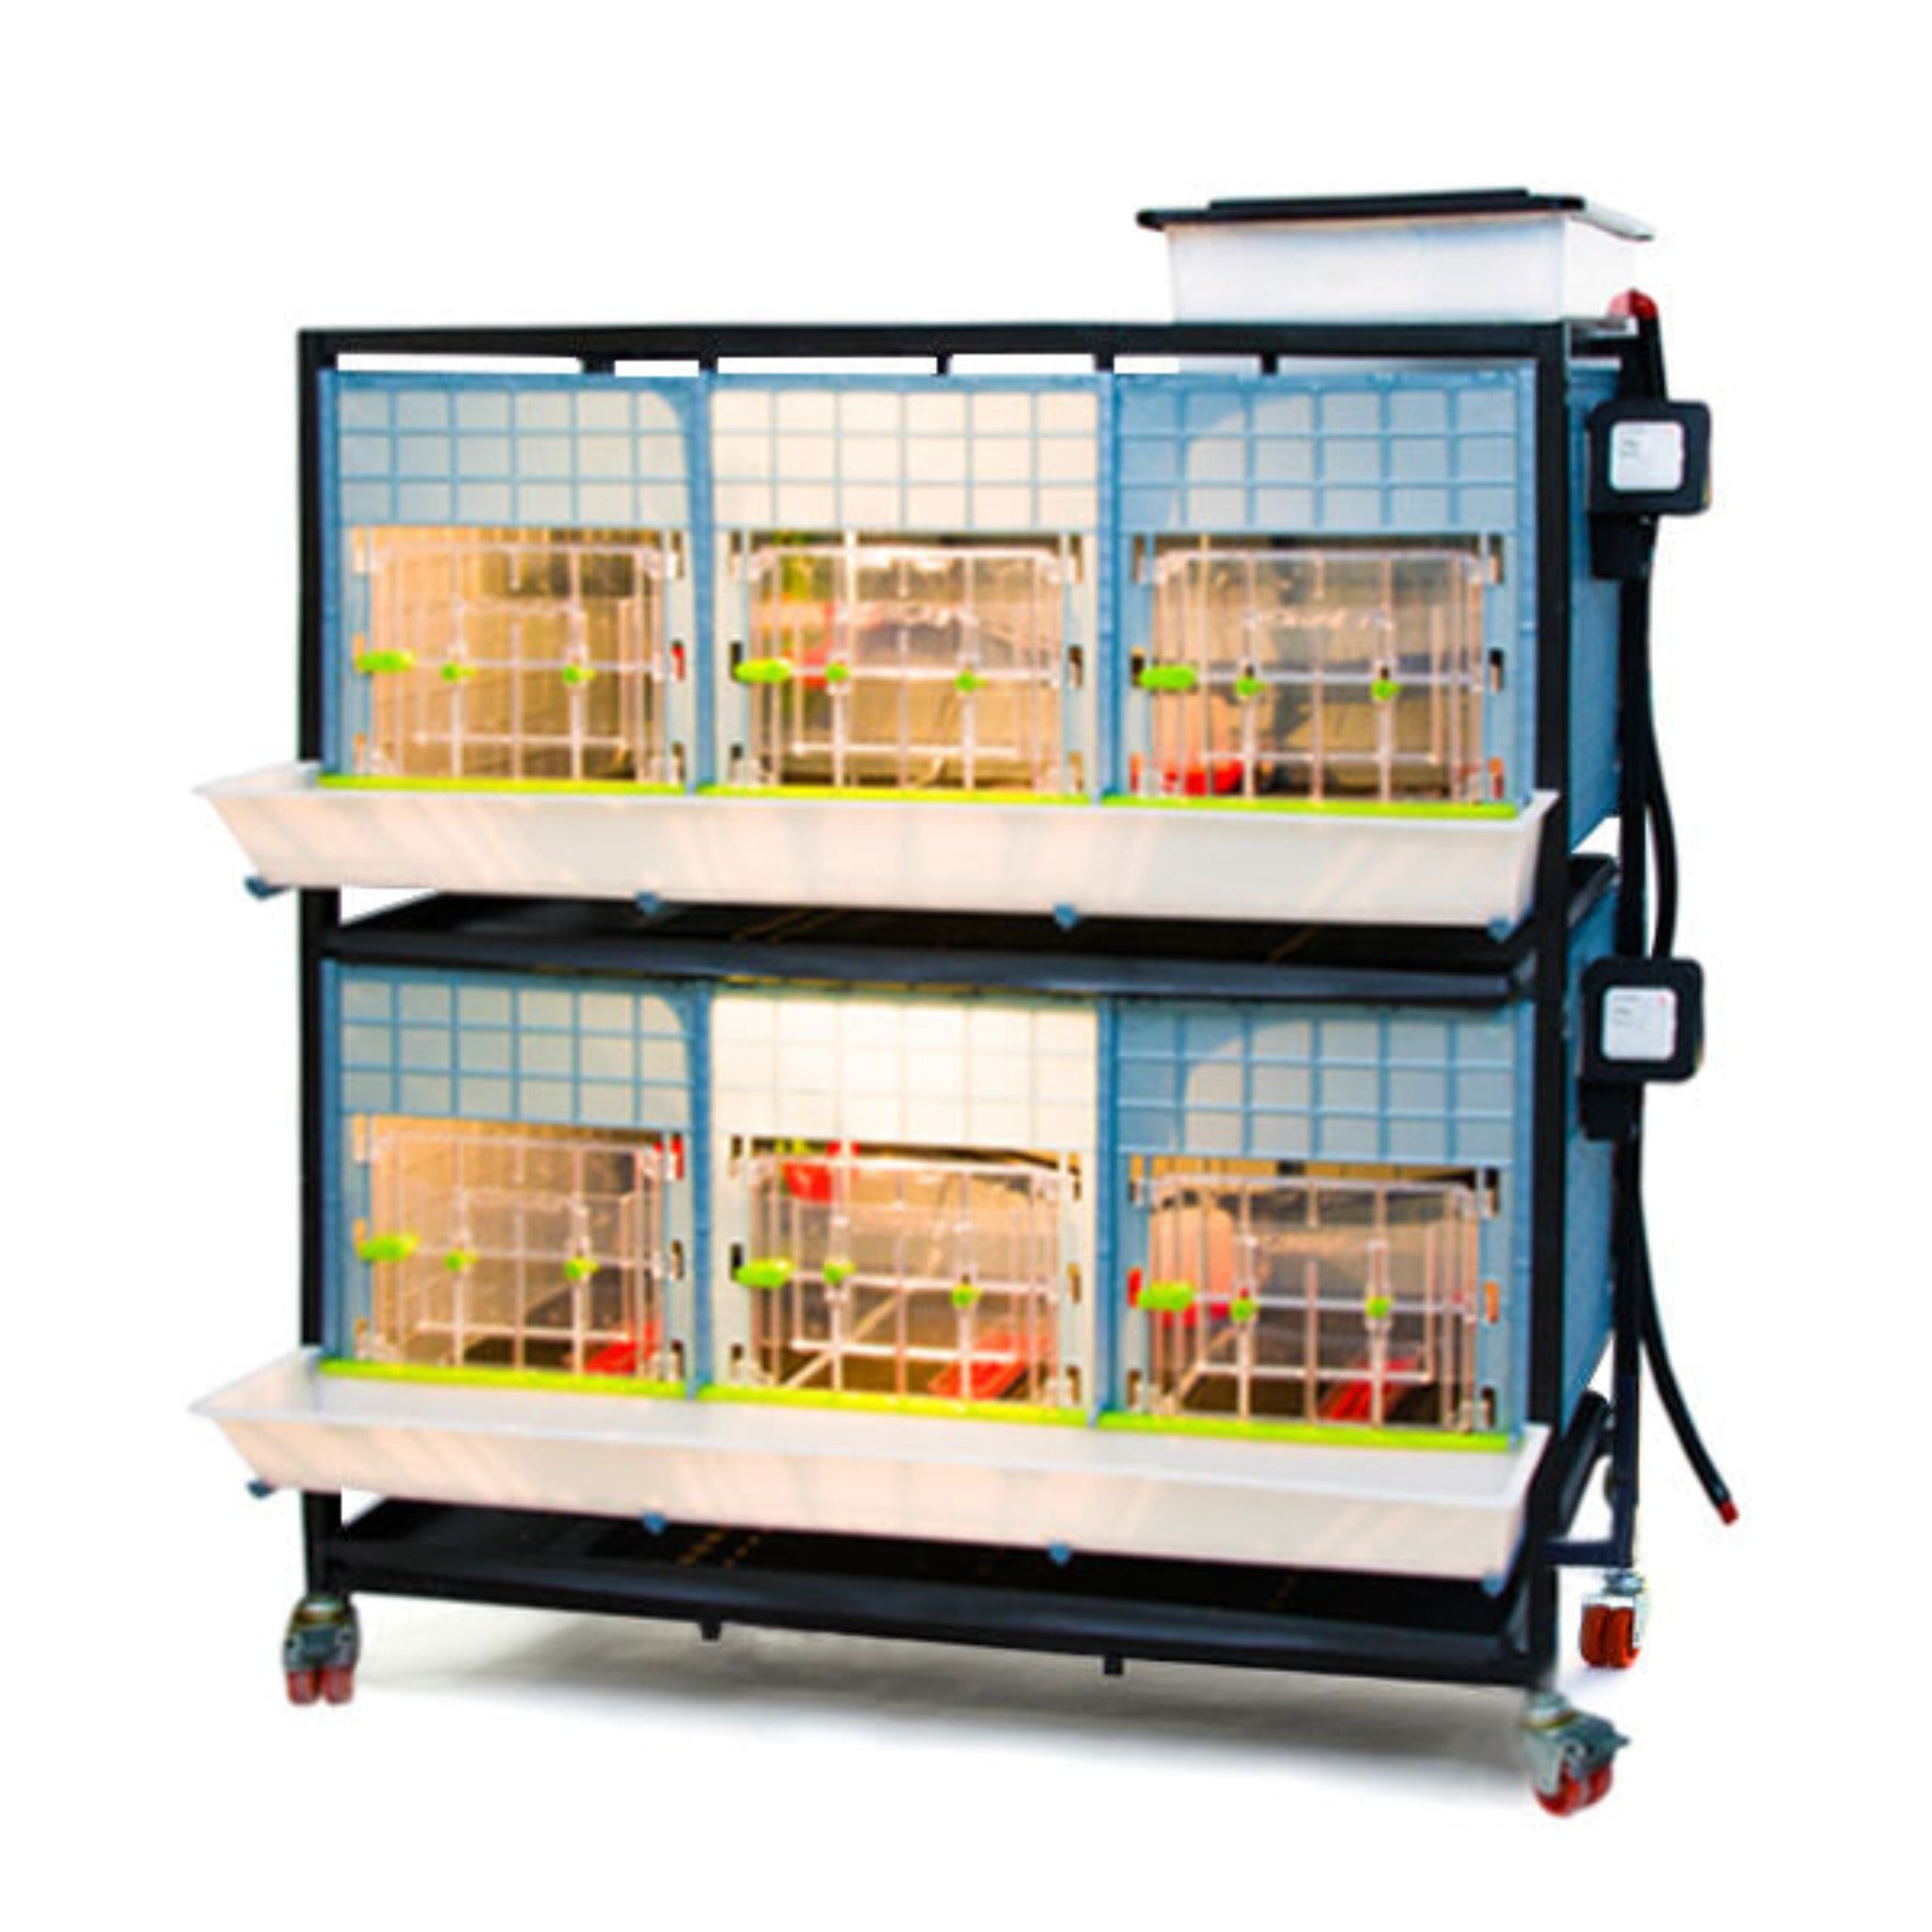 Hatching Time Cimuka 2 Layer 15 Inch Brooder front visible. Feeding trough is located on front of brooders. Clear plastic doors with locks can be seen with LED lights on inside. Heater thermostat visible on side of brooders. Brooders are on Metal frame with rolling casters for mobility.